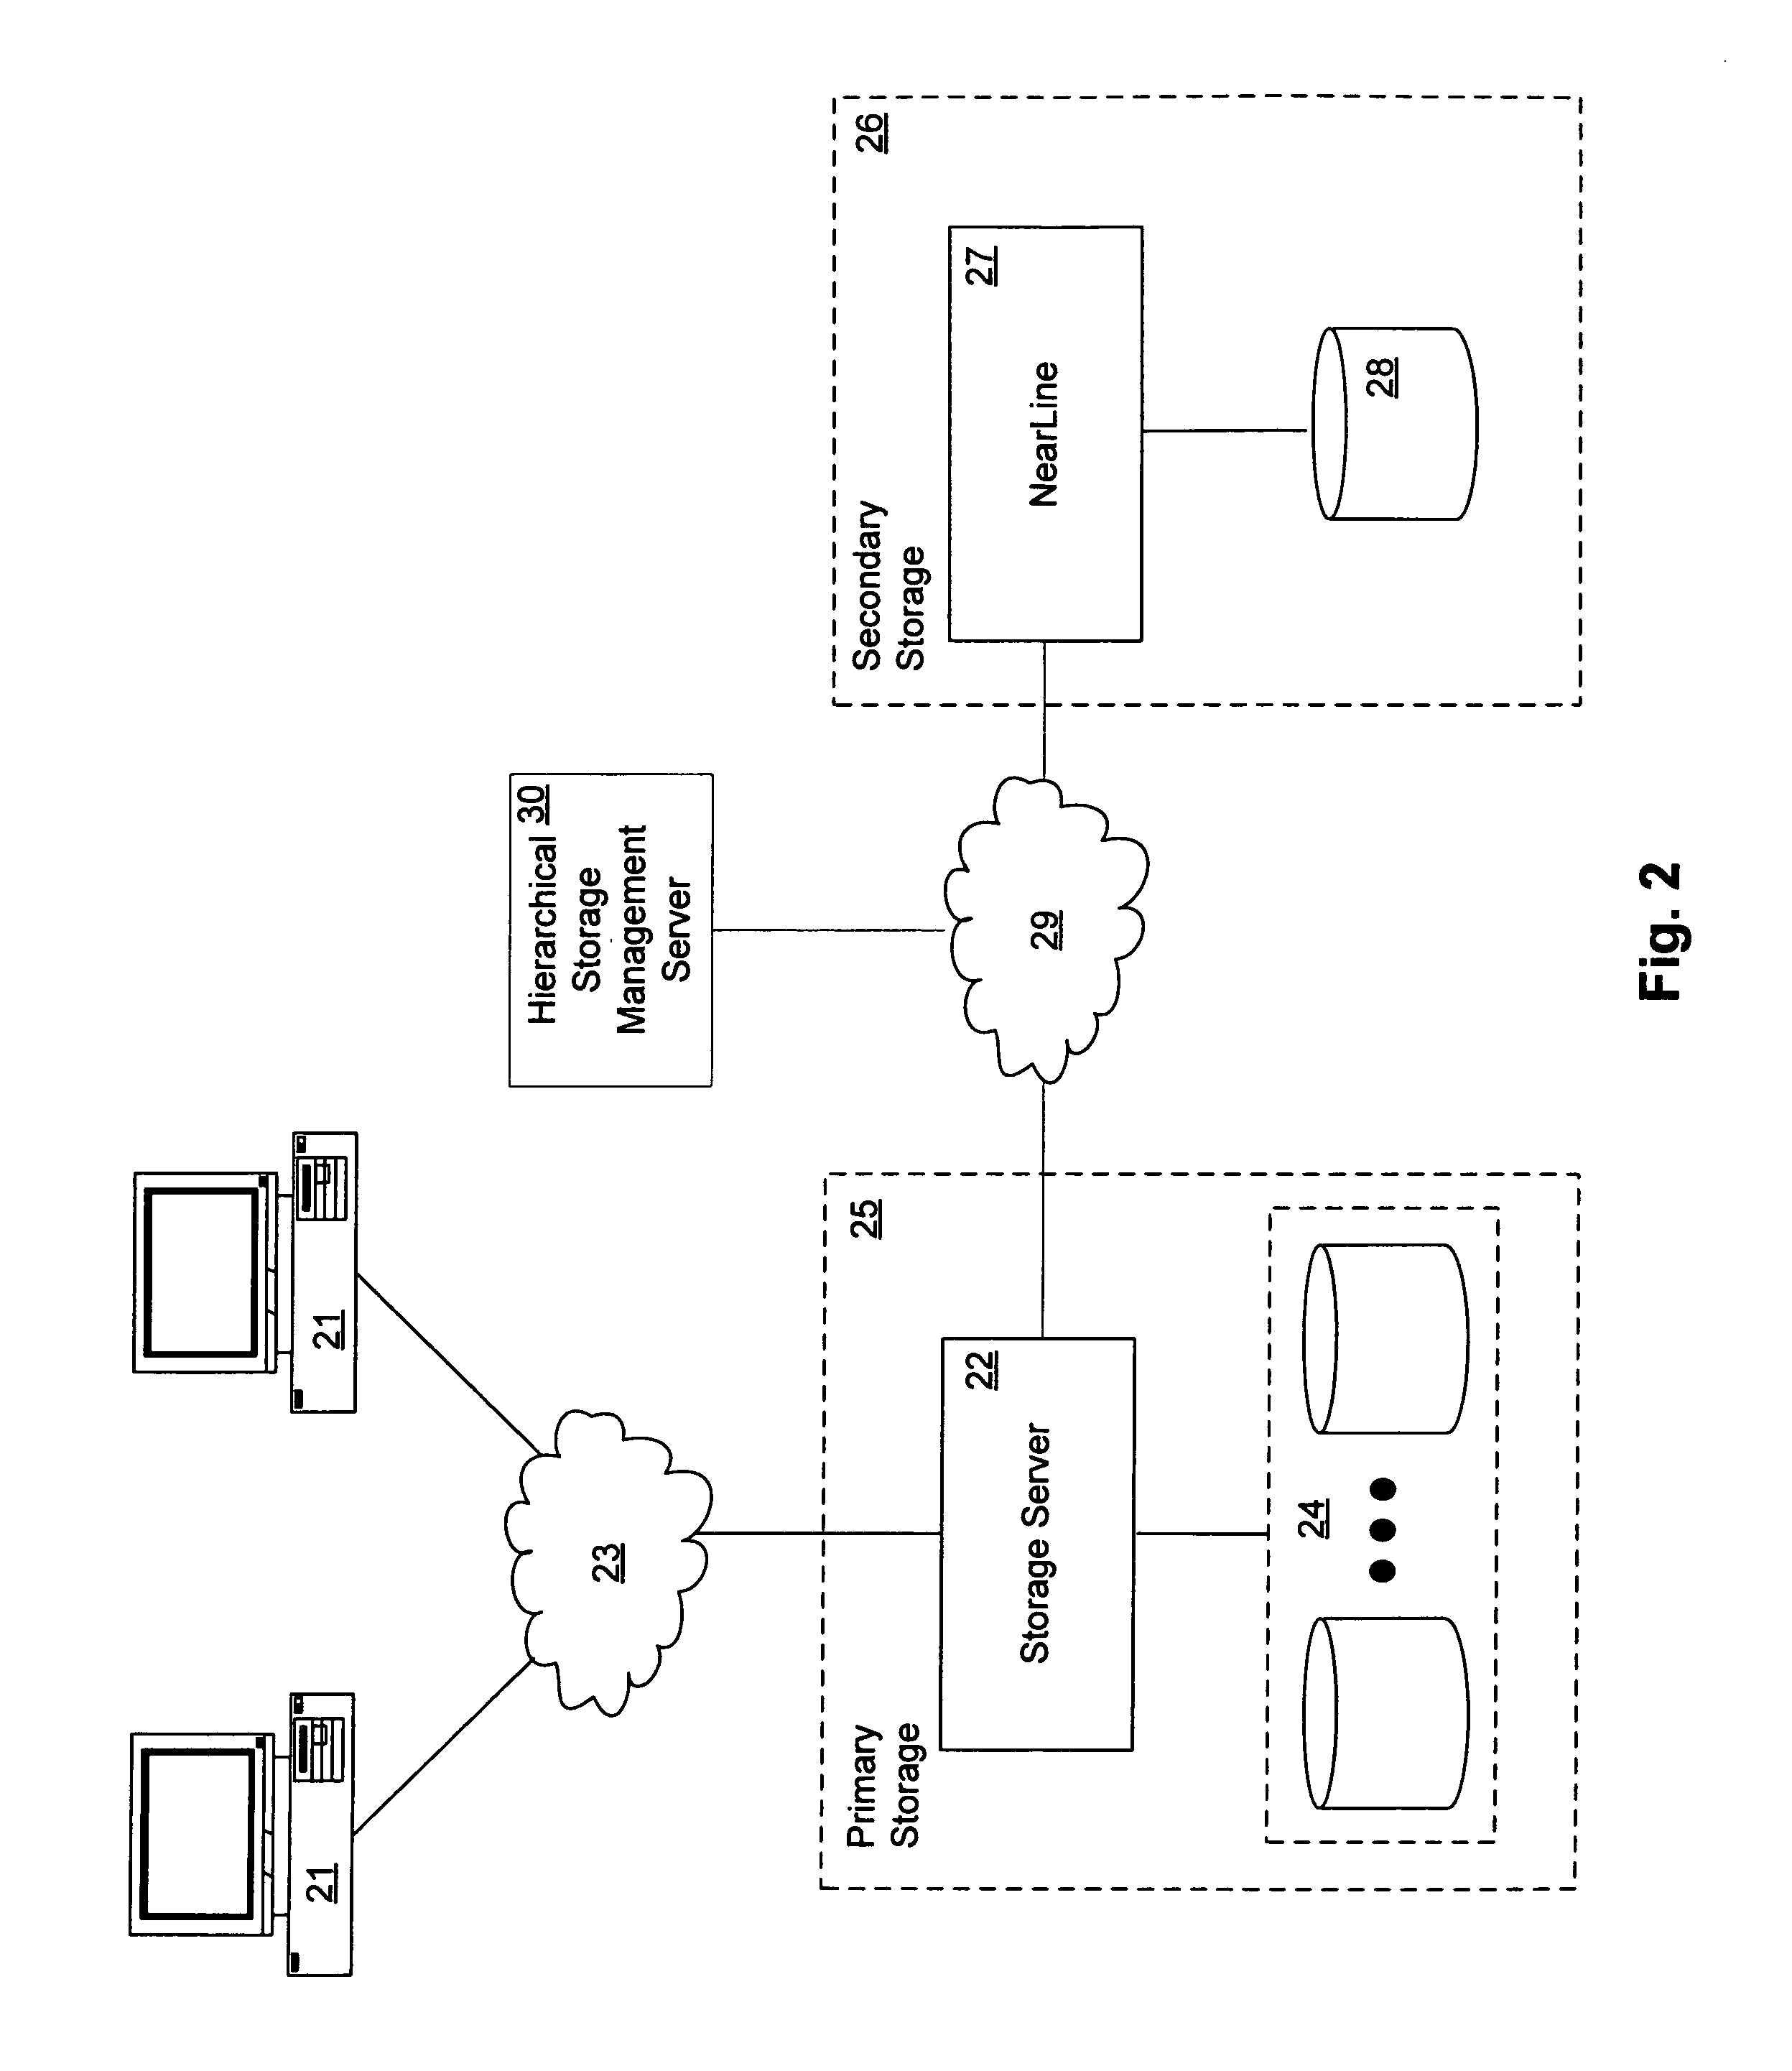 Emulation of transparent recall in a hierarchical storage management system